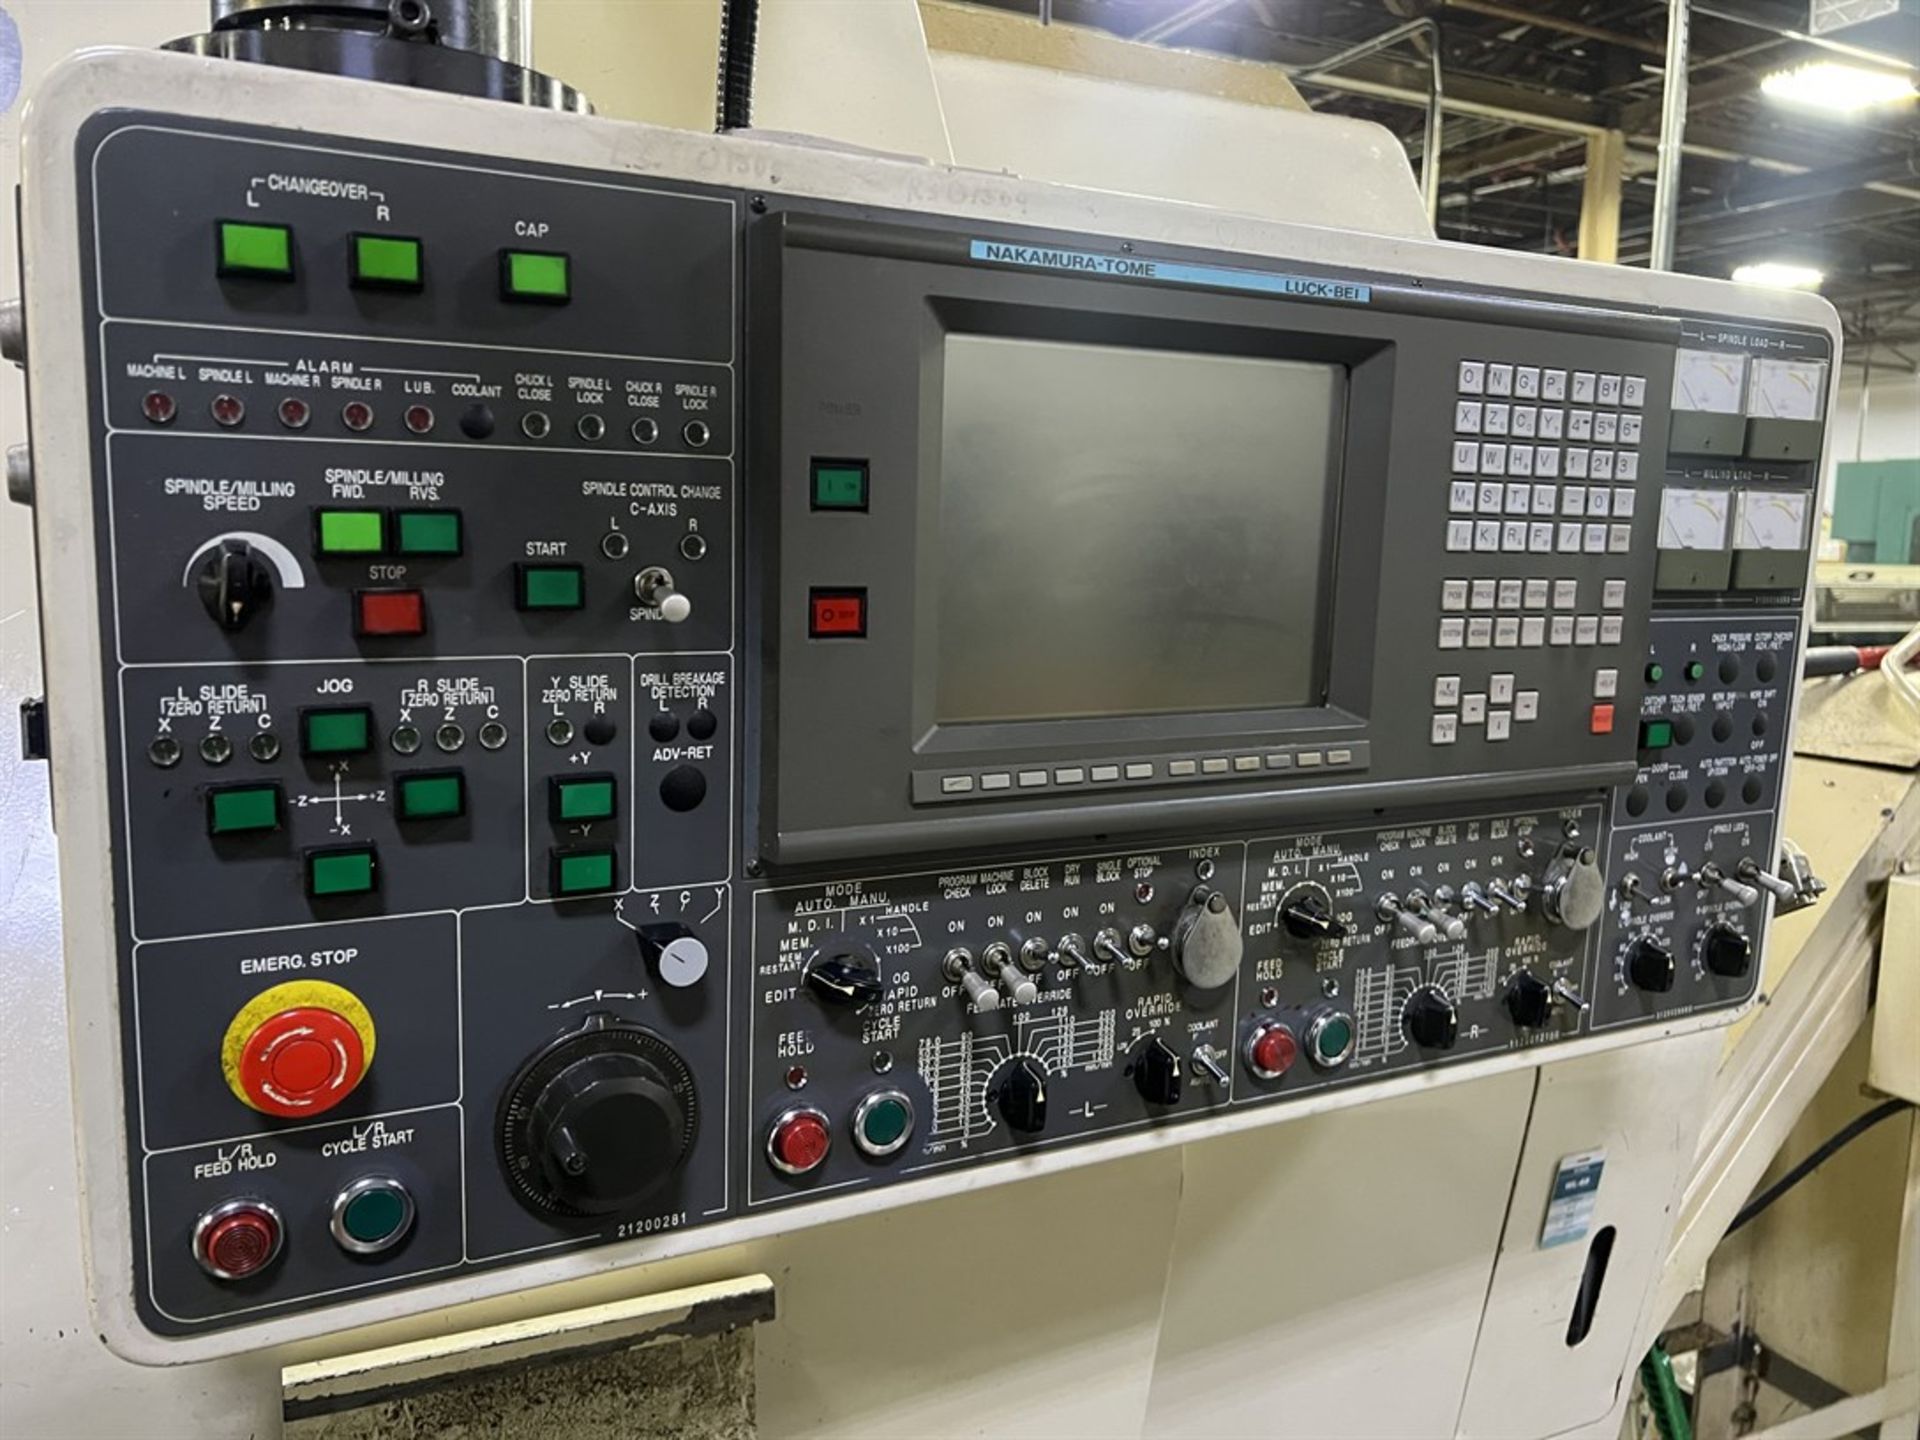 NAKAMURA-TOME TW-20 CNC Opposed Spindle Turning Center, s/n (2), Nakamura-Tome LUCK-BEI Controls, - Image 9 of 11